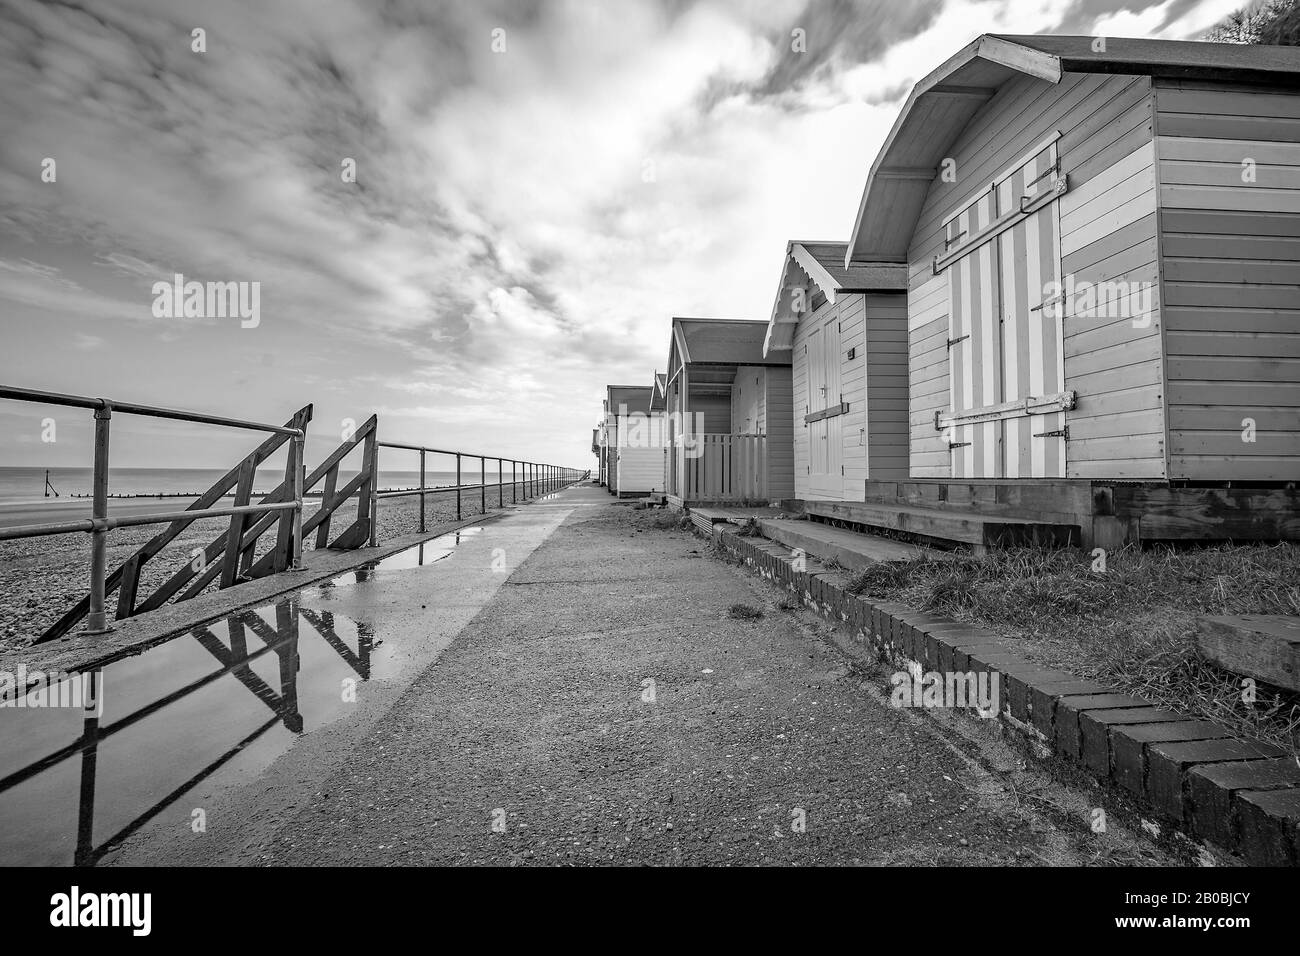 9 Row of traditional wooden beach huts on the promenade beside a sand and shingle beach on the Norfolk coast Stock Photo